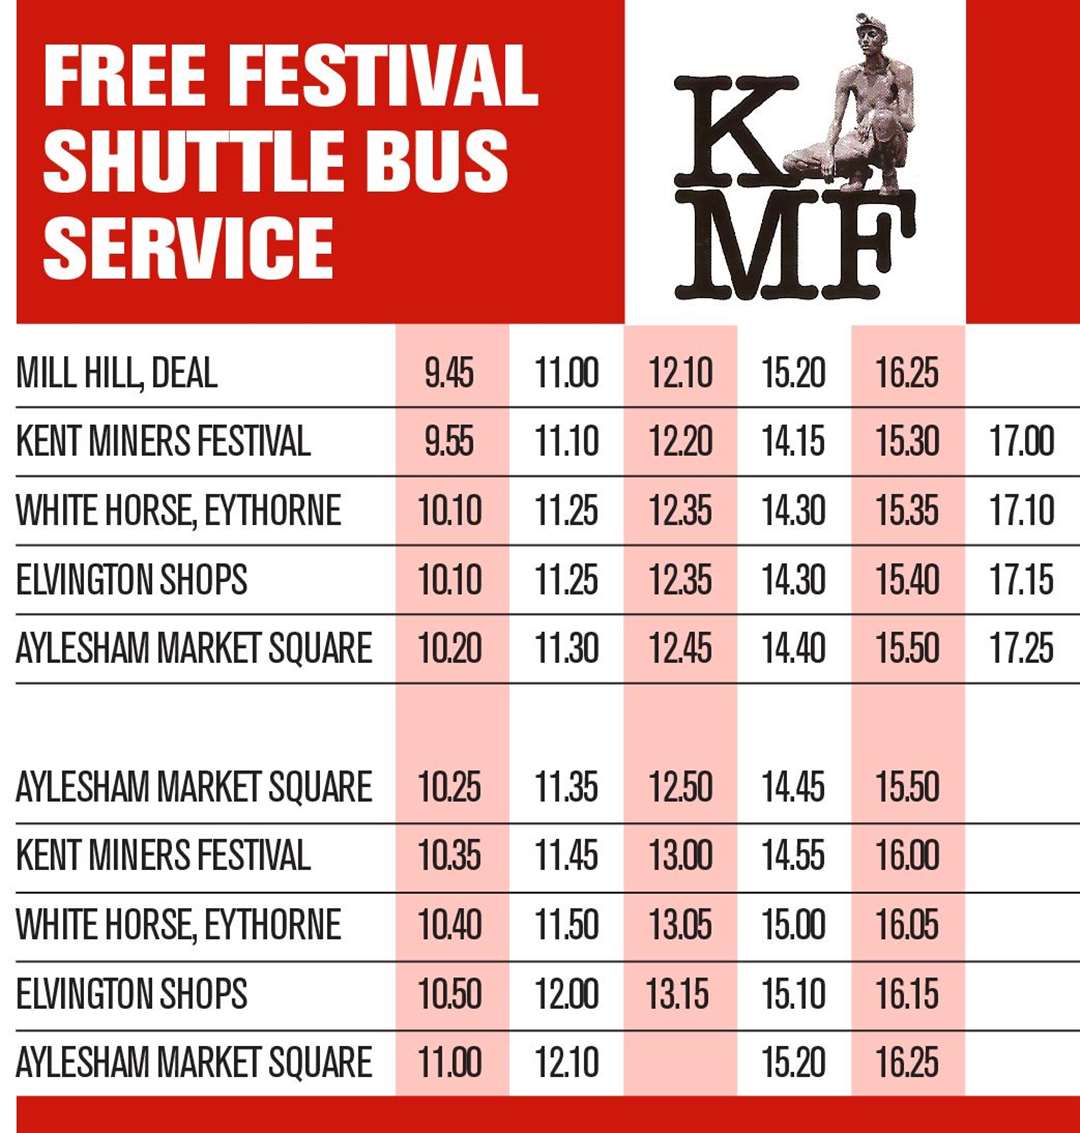 The bus to the Kent Miners Festival is free but spaces are limited